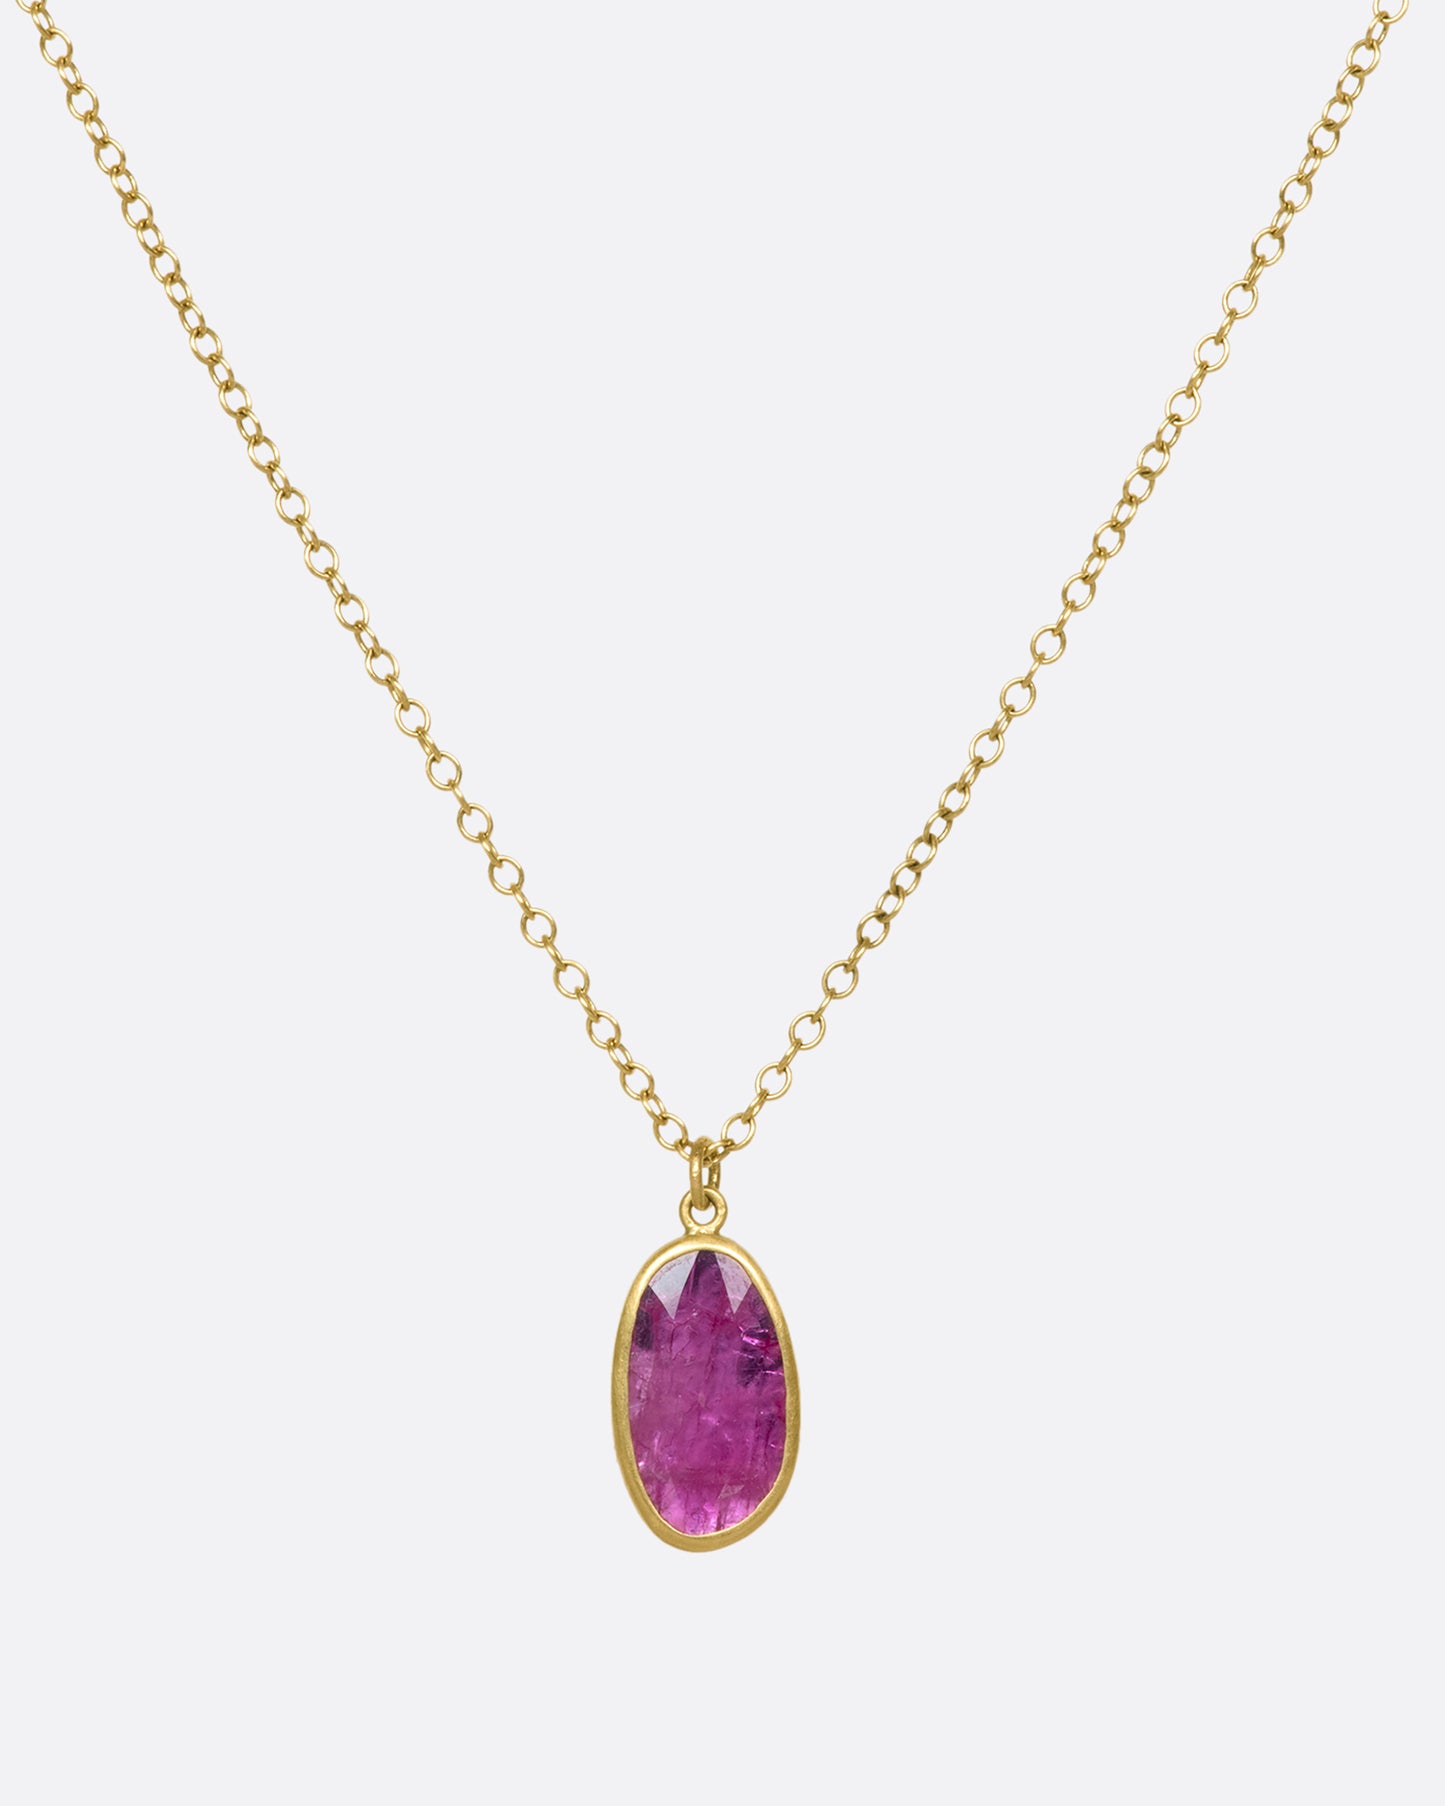 An 18k gold chain with an oval ruby pendant. Rubies are revered for their strong connection to solar energy—symbols of vitality, creativity, and confidence.